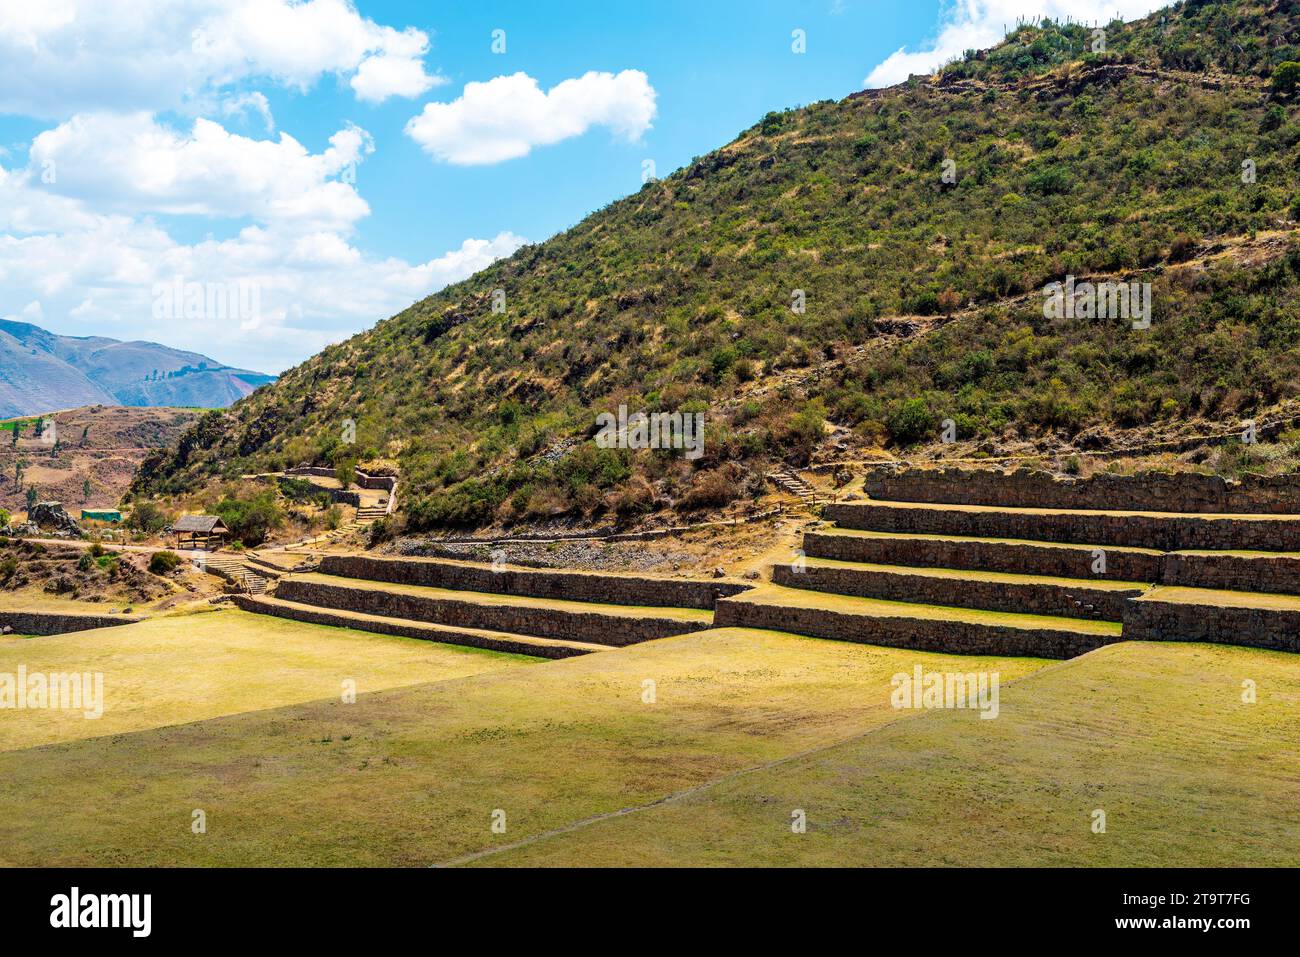 Inca ruin of Tipon with agriculture terraces, Cusco, Peru. Stock Photo